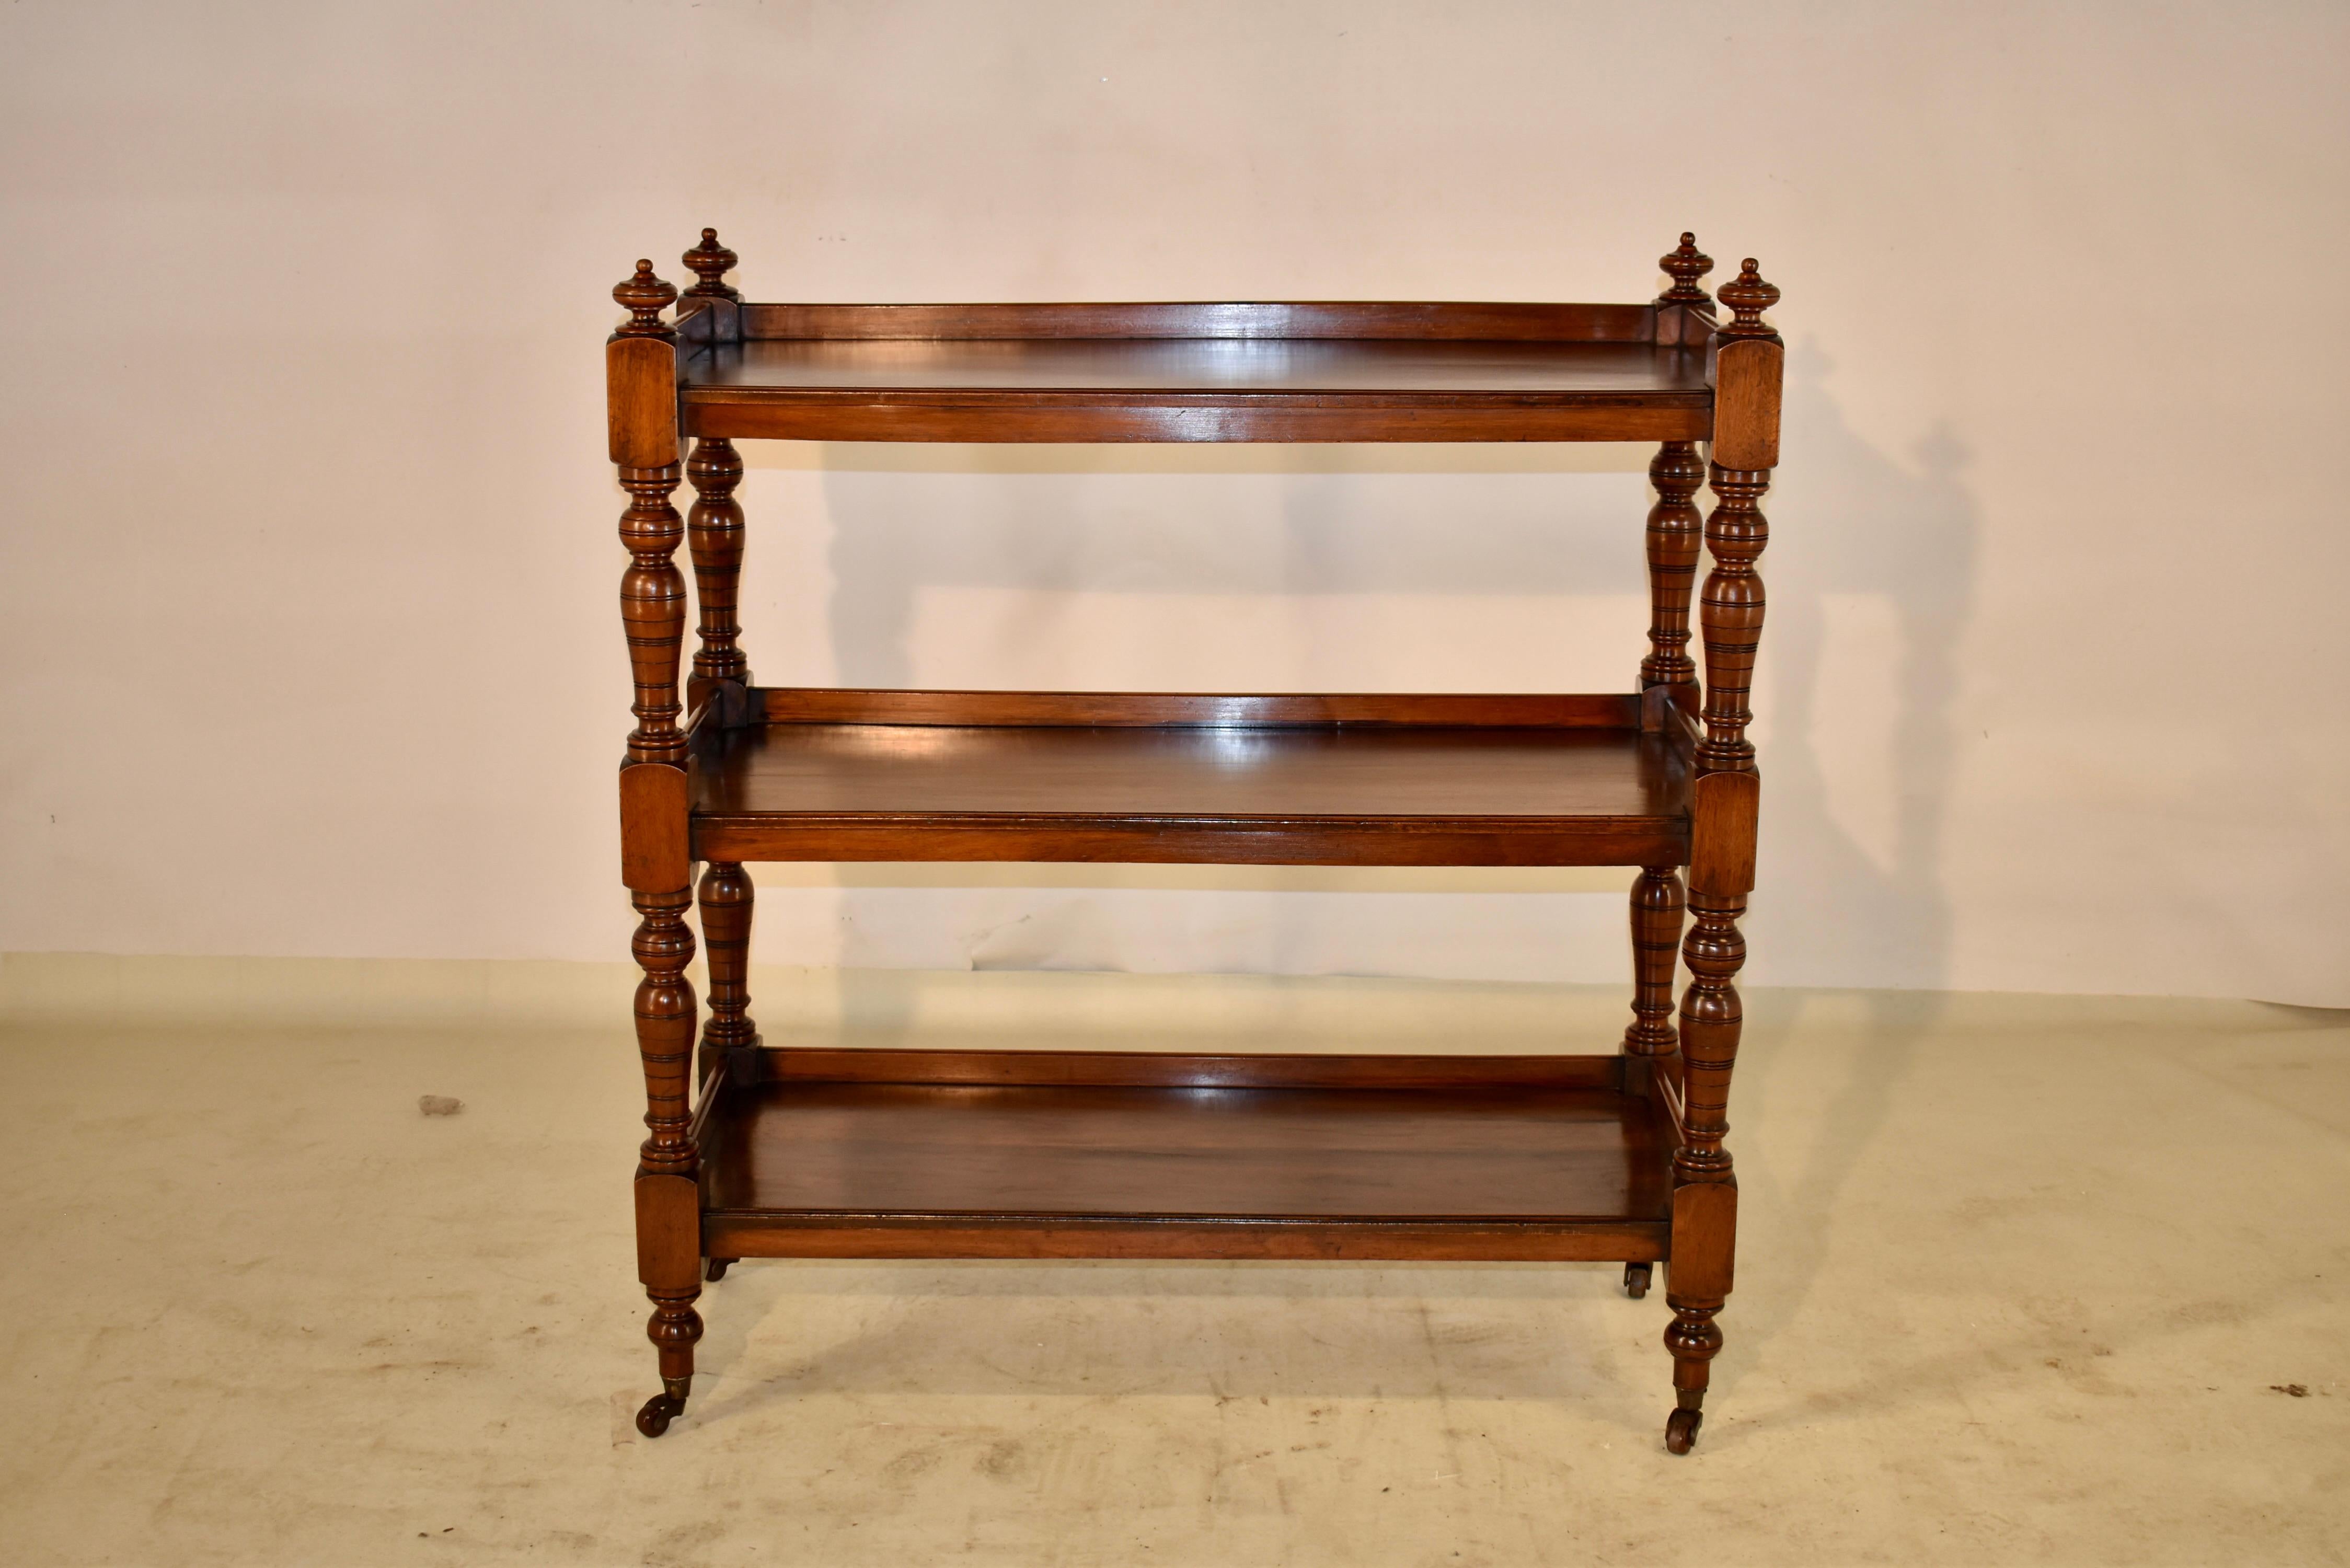 19th Century mahogany dessert buffet from England. The top is decorated with hand turned finials, following down to three shelves, all with galleries. The shelves are separated by hand turned shelf supports, raised on what appear to be the original